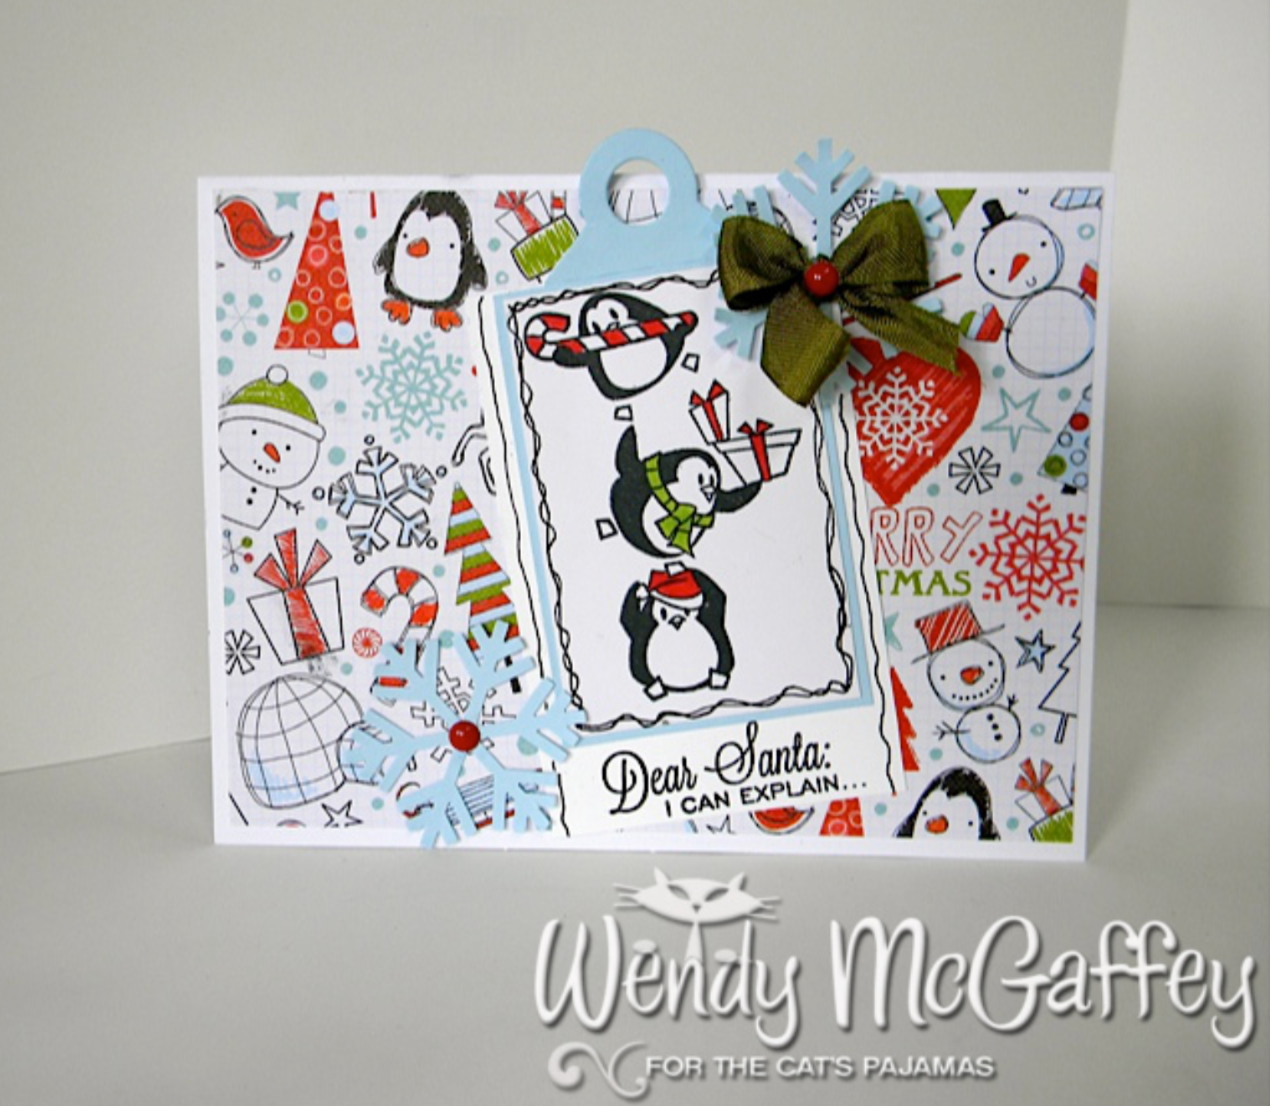 Peace, Joy, and Penguins Digistamps